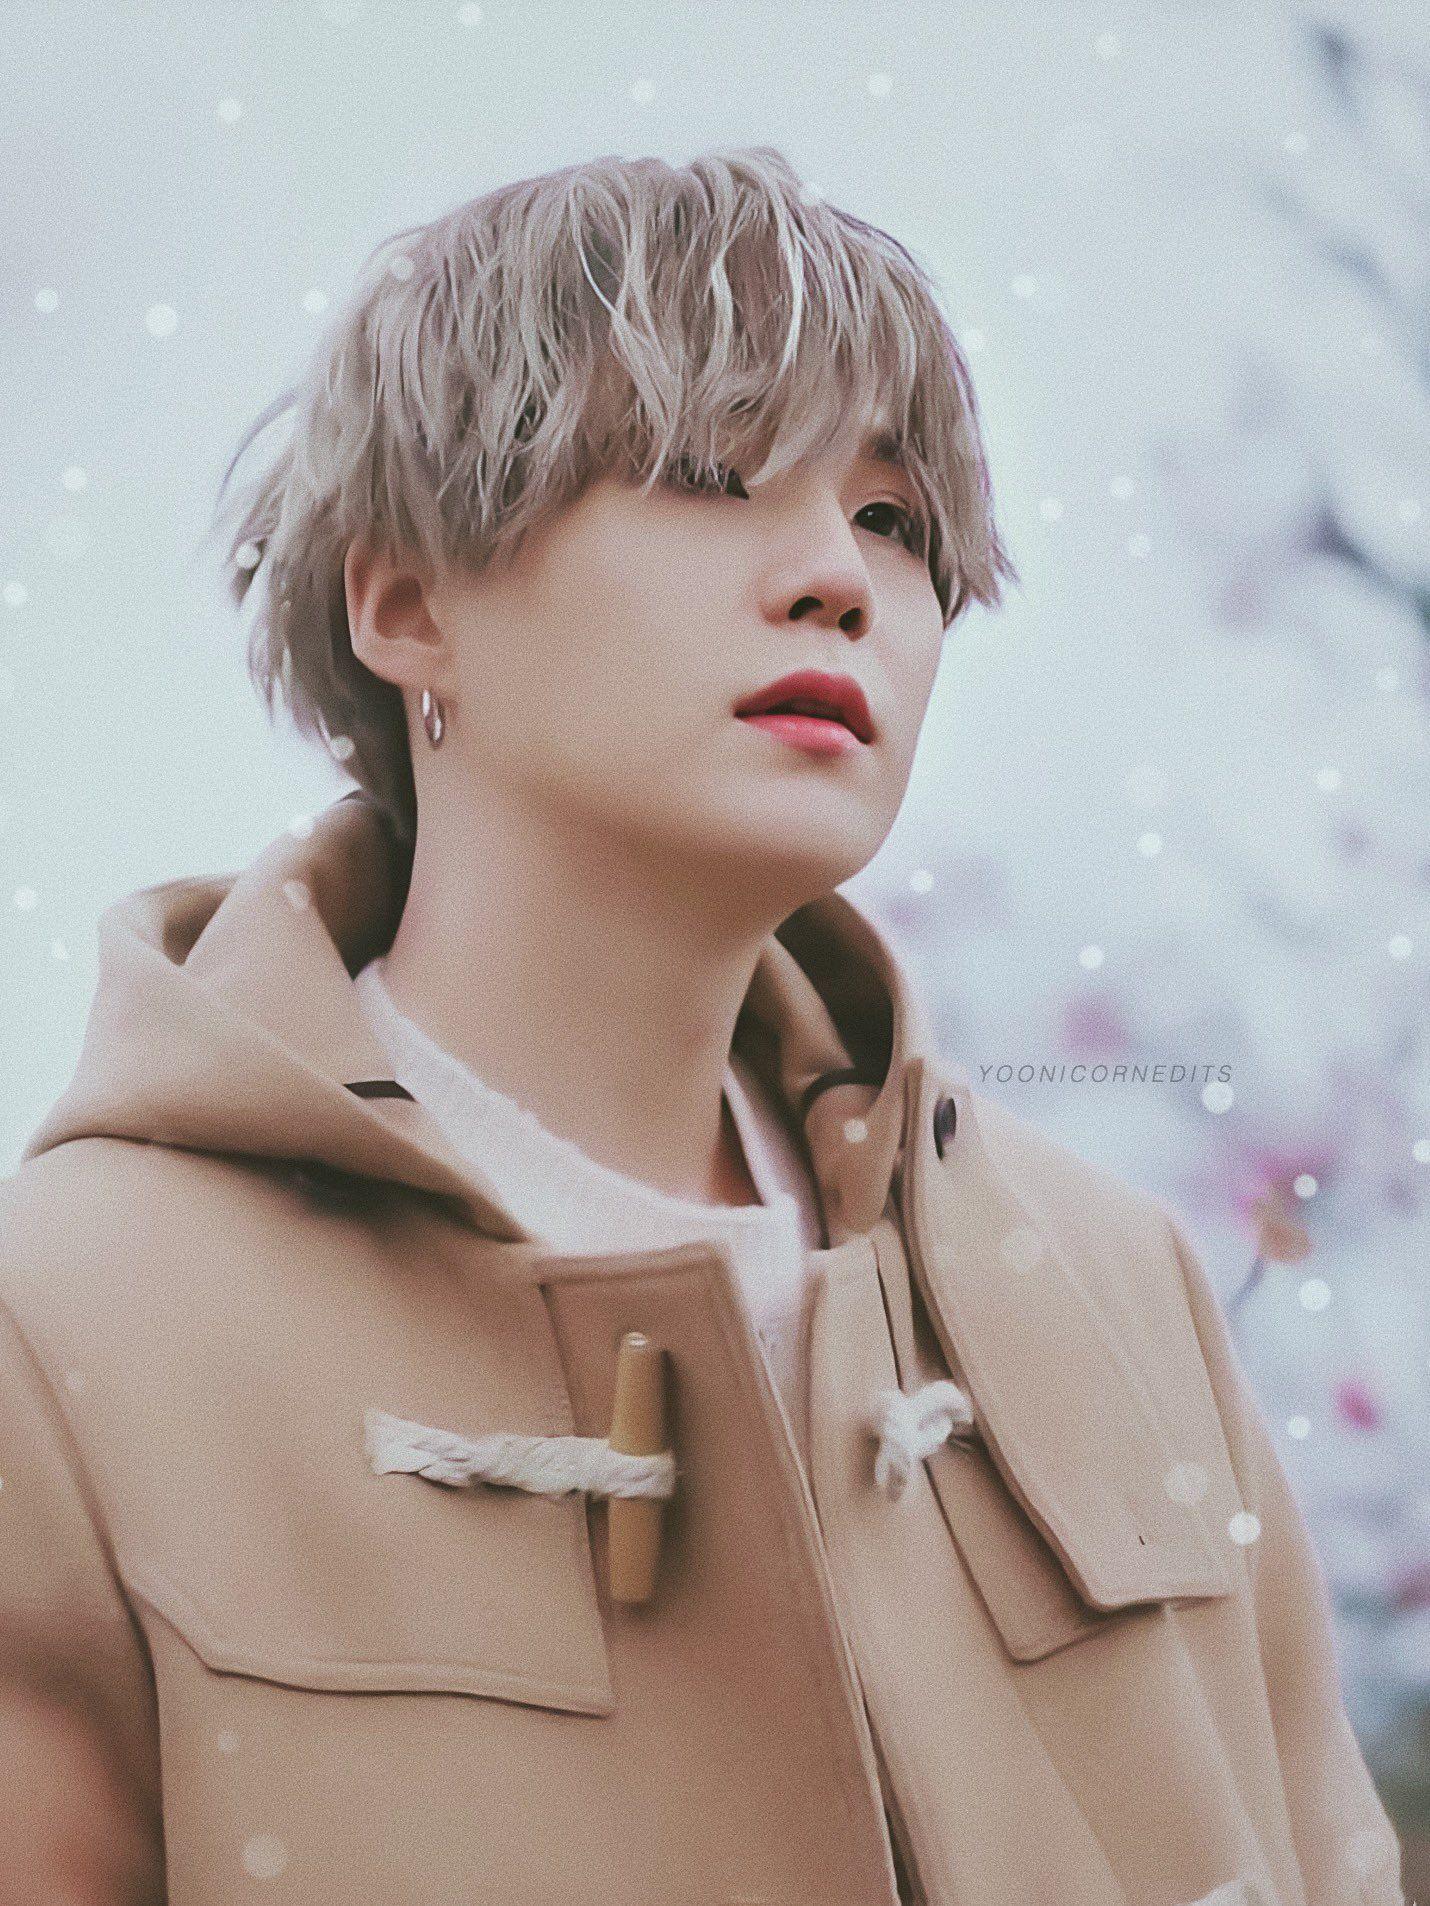 BTS WINTER PACKAGE' PREVIEW SPOT. Min yoongi bts